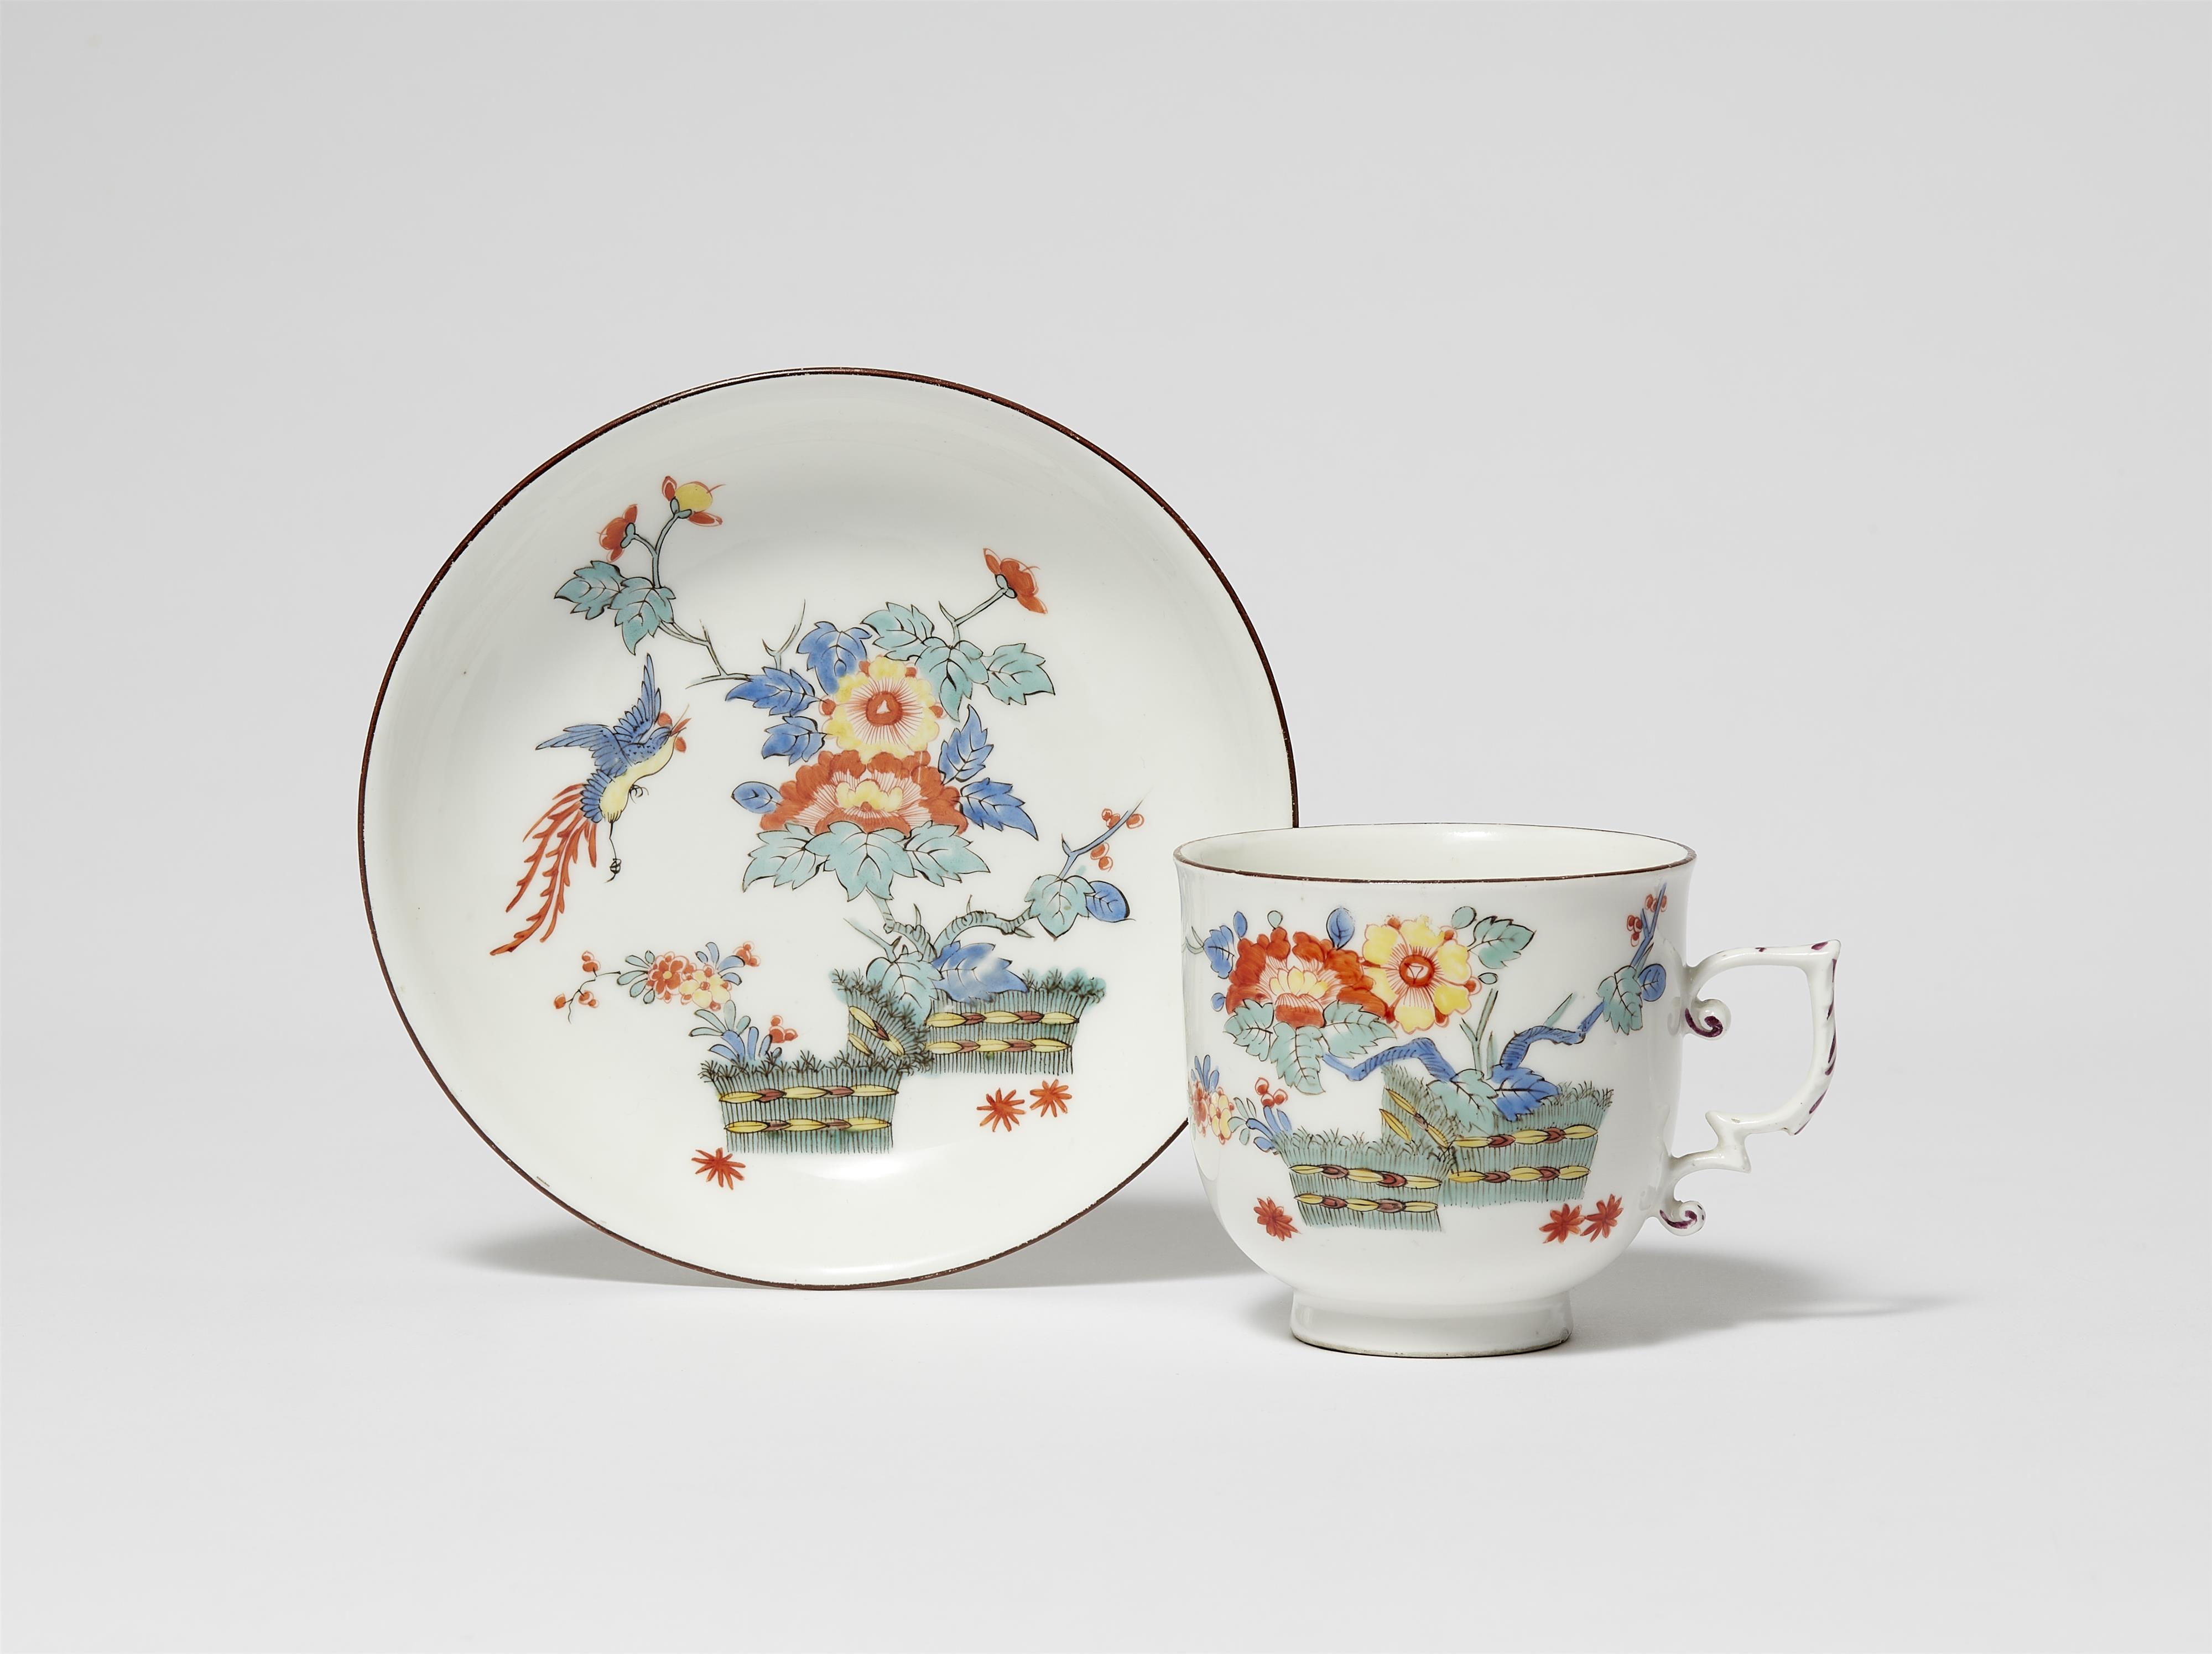 A Meissen porcelain tea bowl and saucer with Hôô birds, peonies and rice straw designs - image-1